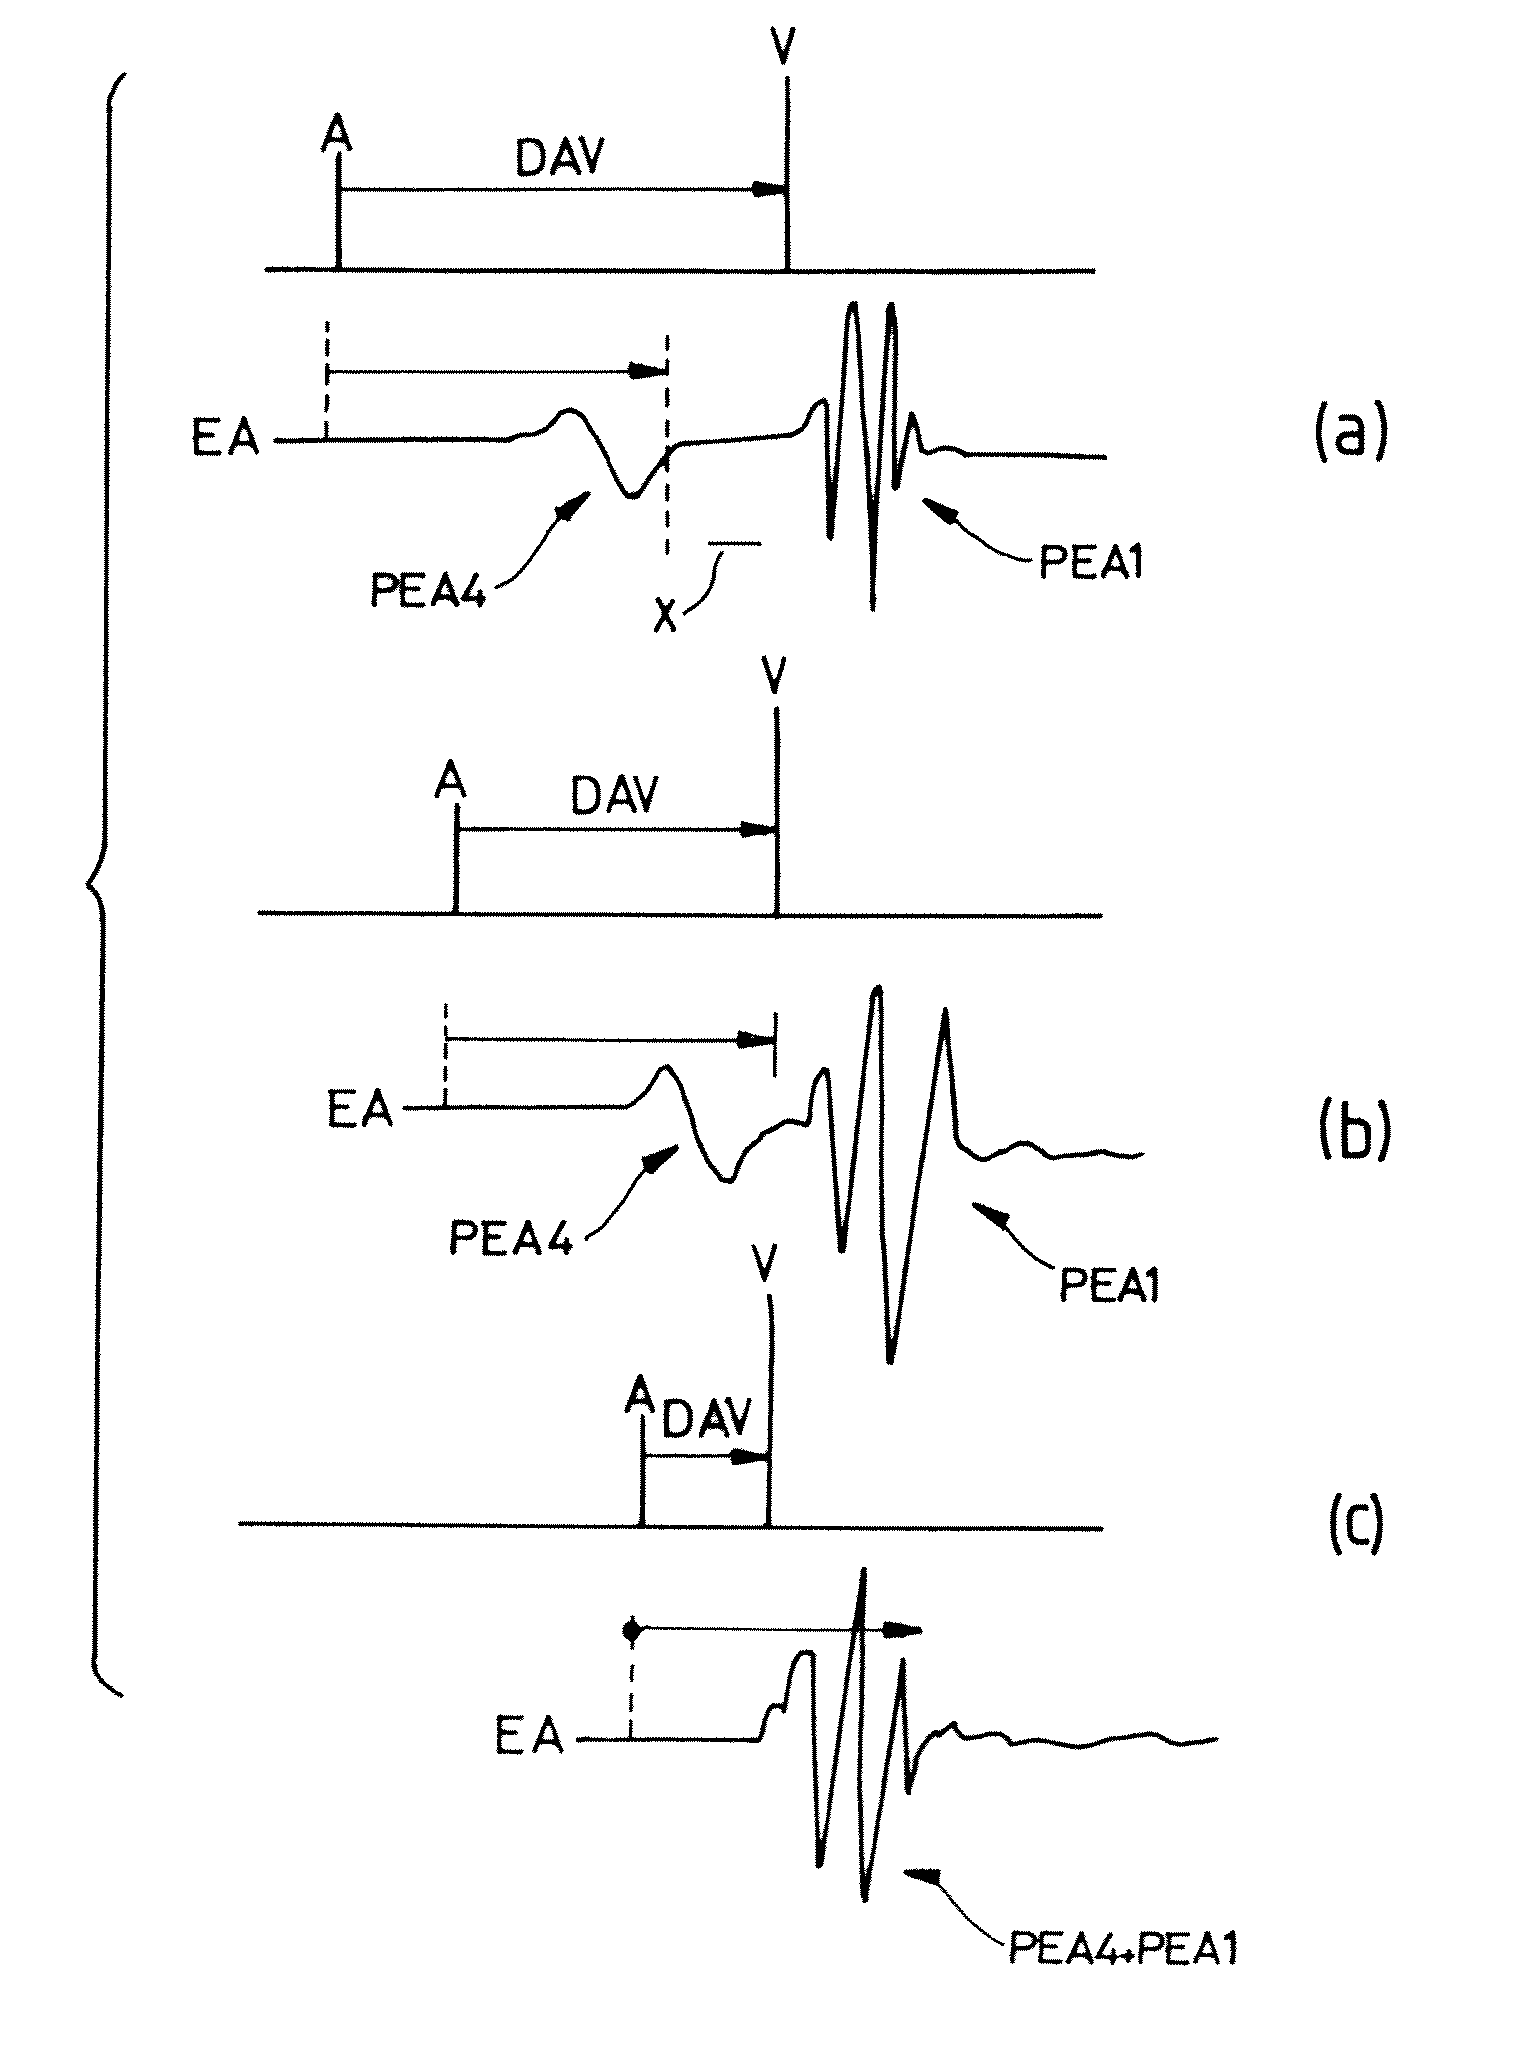 Calculation of the atrioventricular delay for an active implantable metal device